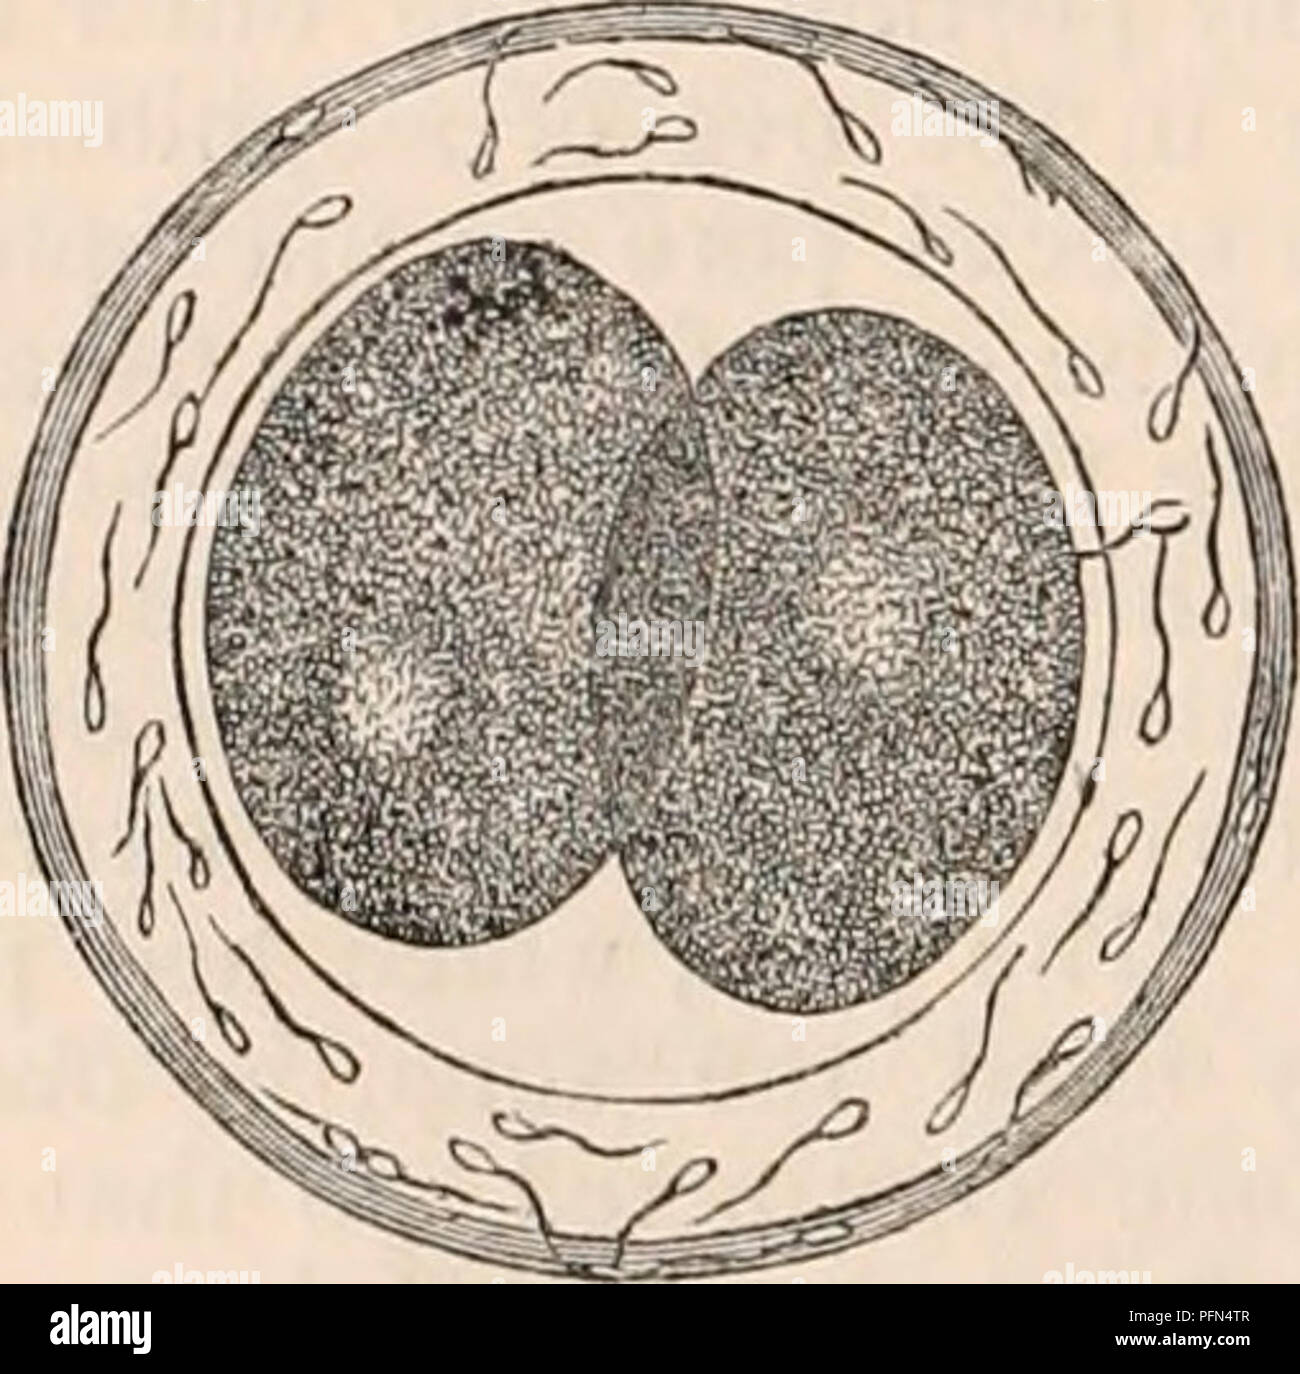 . The cyclopædia of anatomy and physiology. Anatomy; Physiology; Zoology. The ovum a little more advanced in the tube. (After Bischoff.) The surface is perfectly smooth. Spermatozoa have penetrated the zona pellucida. The respira- tory chamber is formed between the latter and the yelk. The rotation of the yelk has commenced, as indicated by the arrows. The granular bodies ap- pear preparatory to the segmentation of the yelk. Several of these stages are seen commencing in the preceding figure. Rabbit. This change is preliminary to another oc- currence, which has been observed in the ova of many Stock Photo